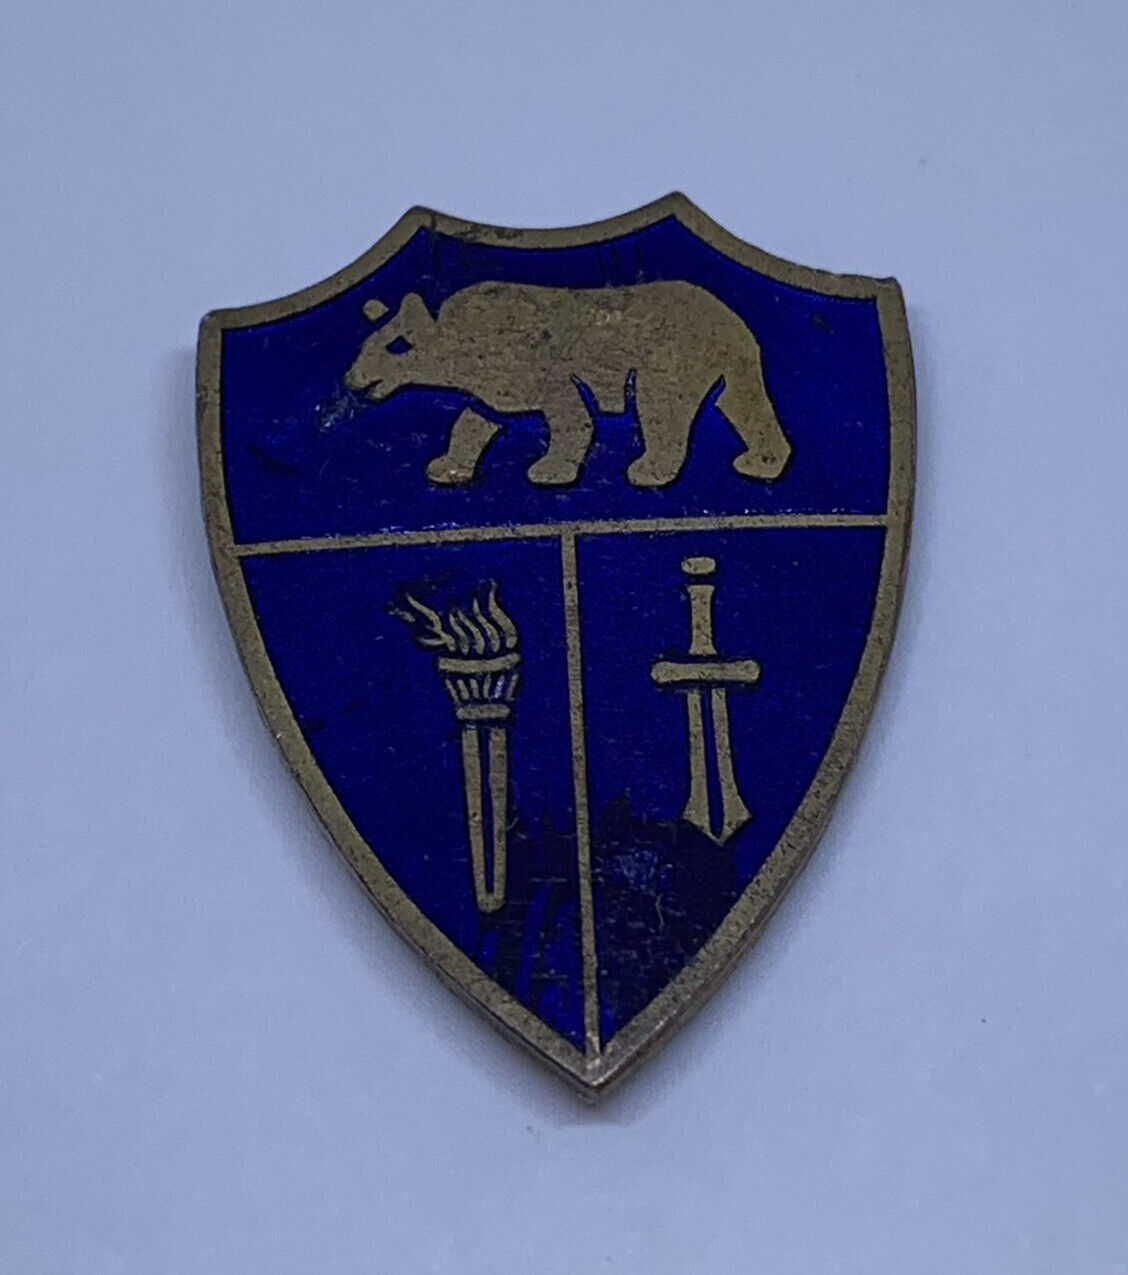 BLEMISHED Vintage California Cadet Corps Lapel Pin (97)